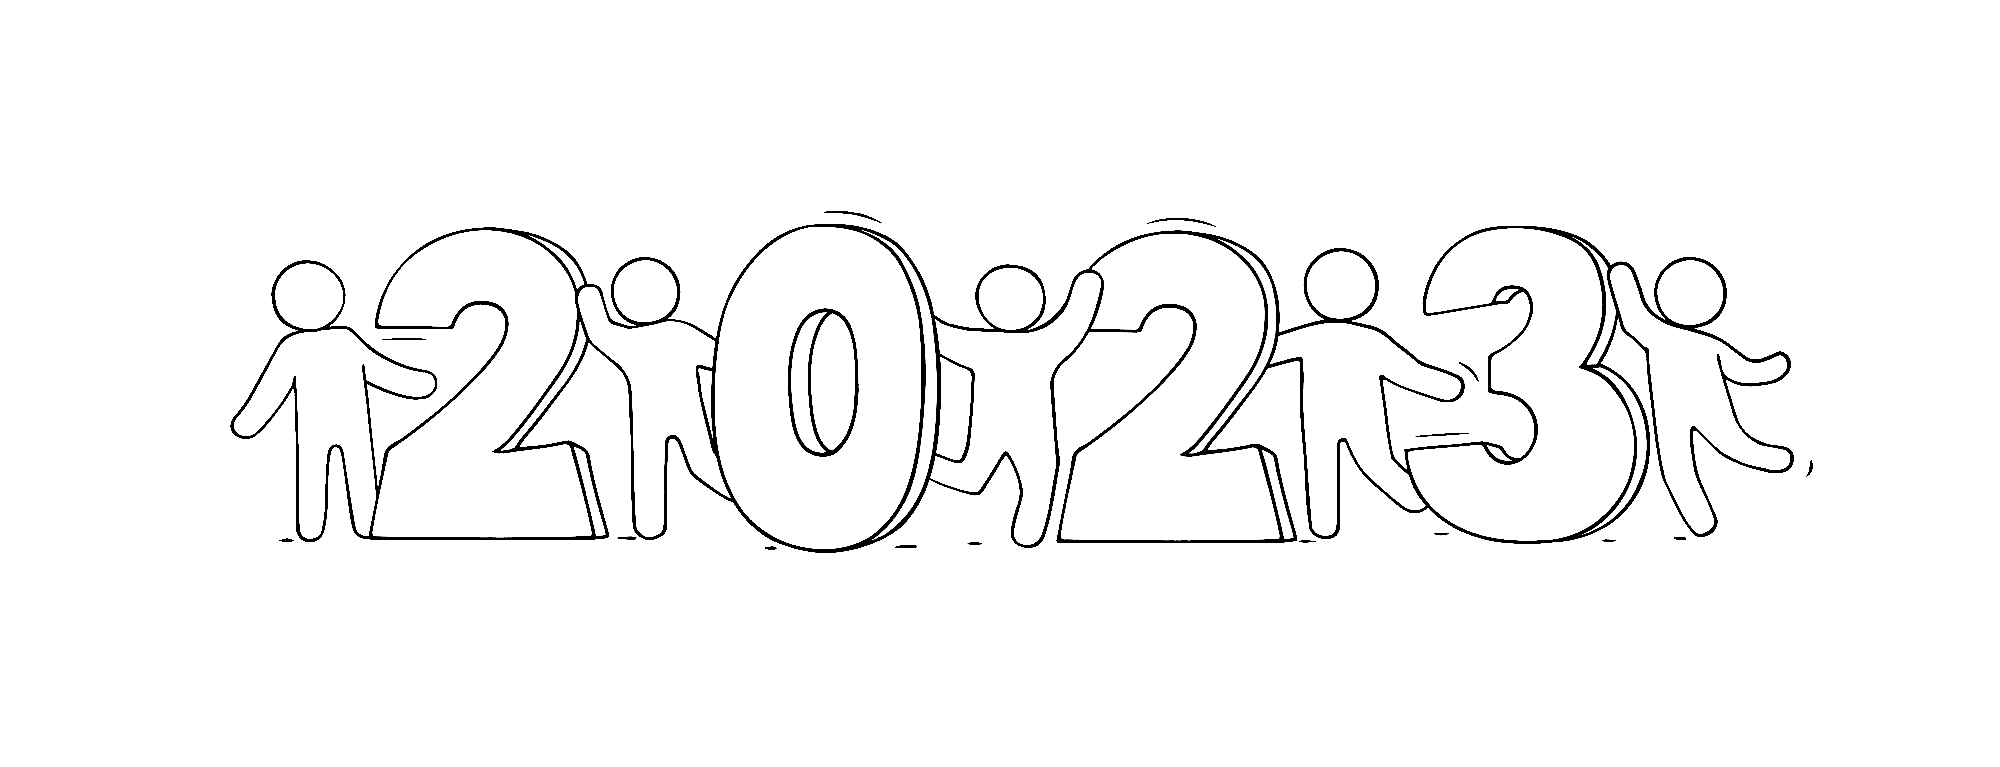 New Year 2023 Coloring Page